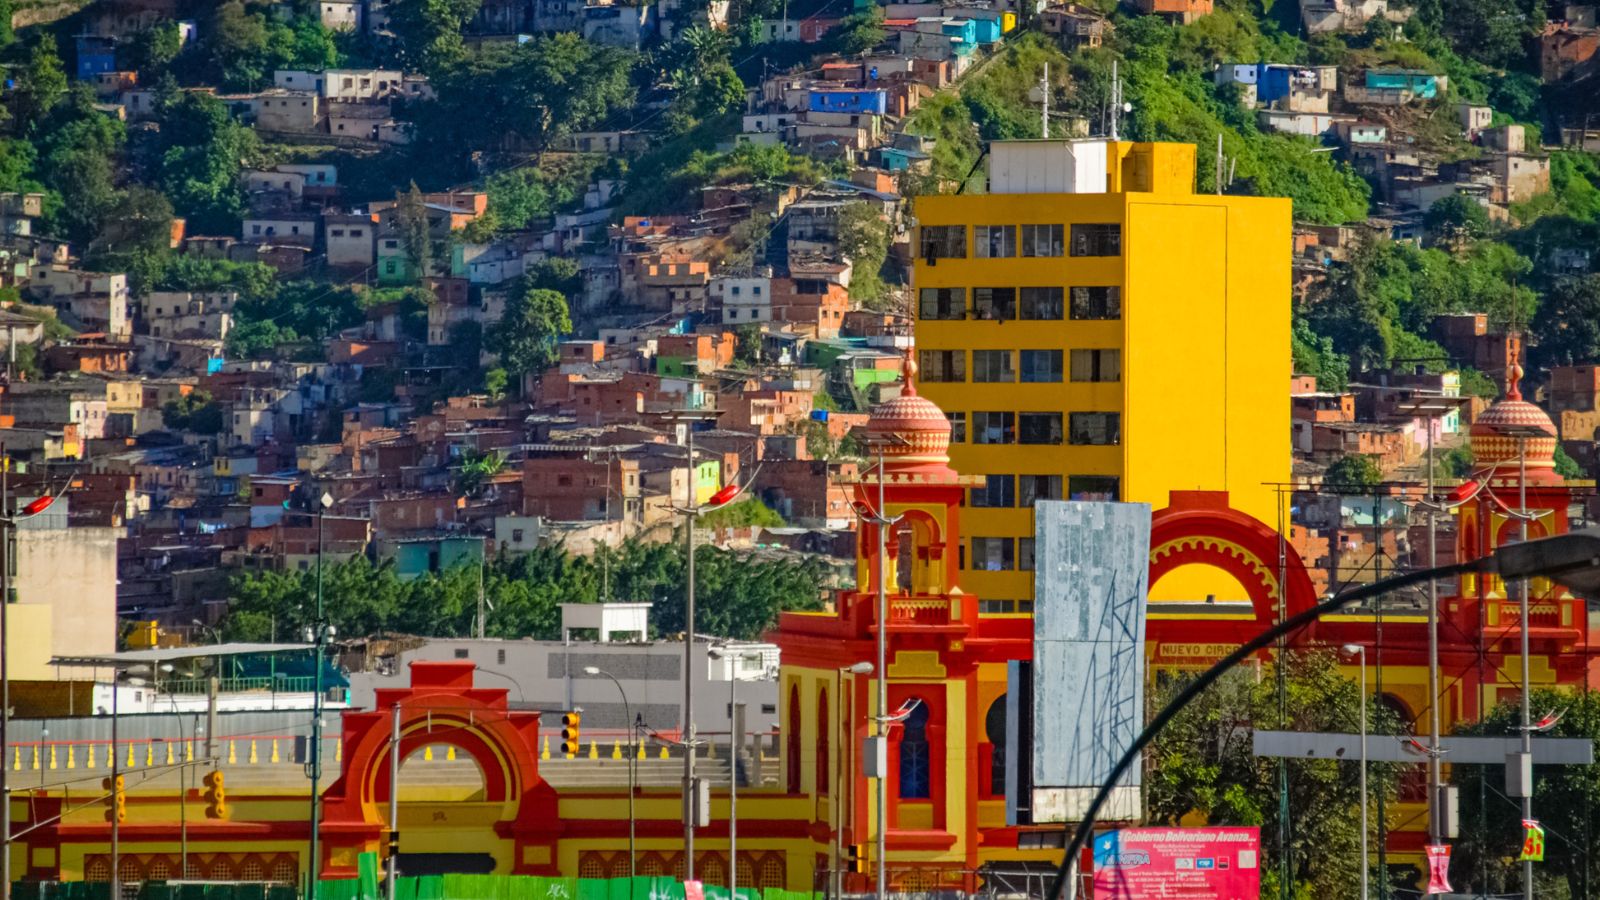 <p>Venezuela’s cultural and commercial capital boasts historical landmarks and Parque Central Towers, one of the tallest skyscrapers. Only a few travelers know that the U.S. Department of State has issued <a href="https://travel.state.gov/content/travel/en/traveladvisories/traveladvisories/venezuela-travel-advisory.html#:~:text=Venezuela%20-%20Level%204:%20Do%20Not%20Travel&text=Last%20Update:%20Reissued%20with%20updates,terrorism,%20and%20poor%20health%20infrastructure.">Level 4 (Do Not Travel)</a> travel advisory for Venezuela due to violent crimes, political demonstrations, and civil turbulence.</p><p>Many countries, including the United States, have shut down their embassies in Caracas.</p>